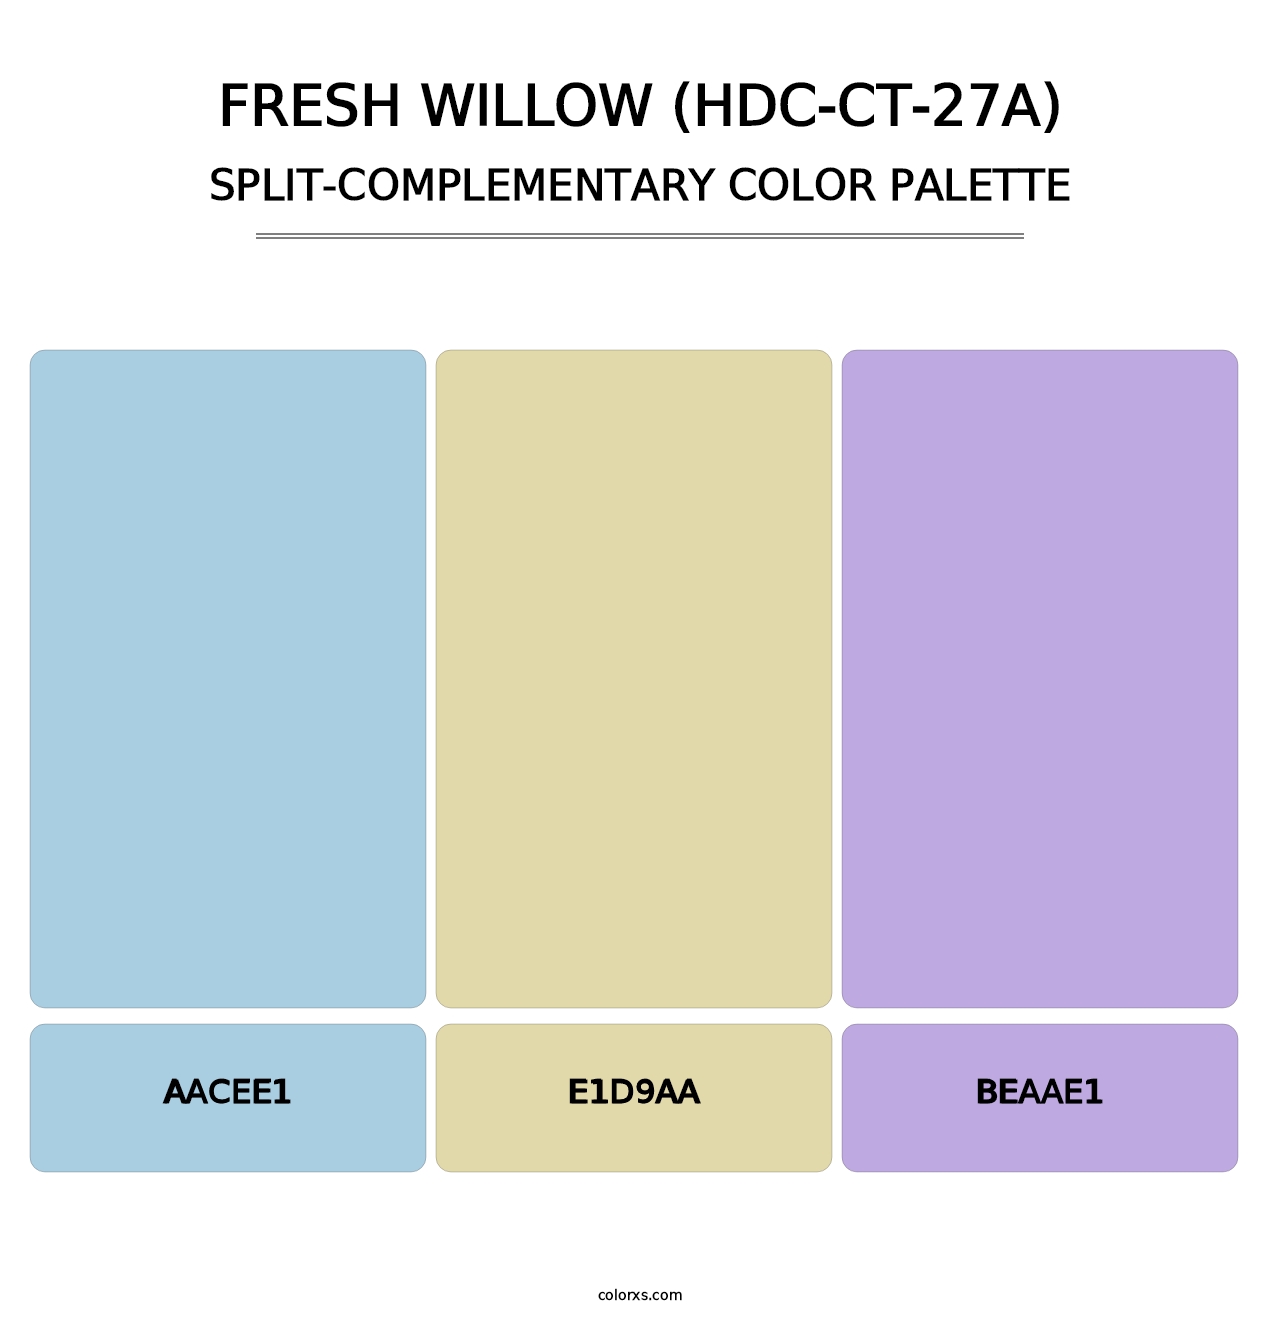 Fresh Willow (HDC-CT-27A) - Split-Complementary Color Palette